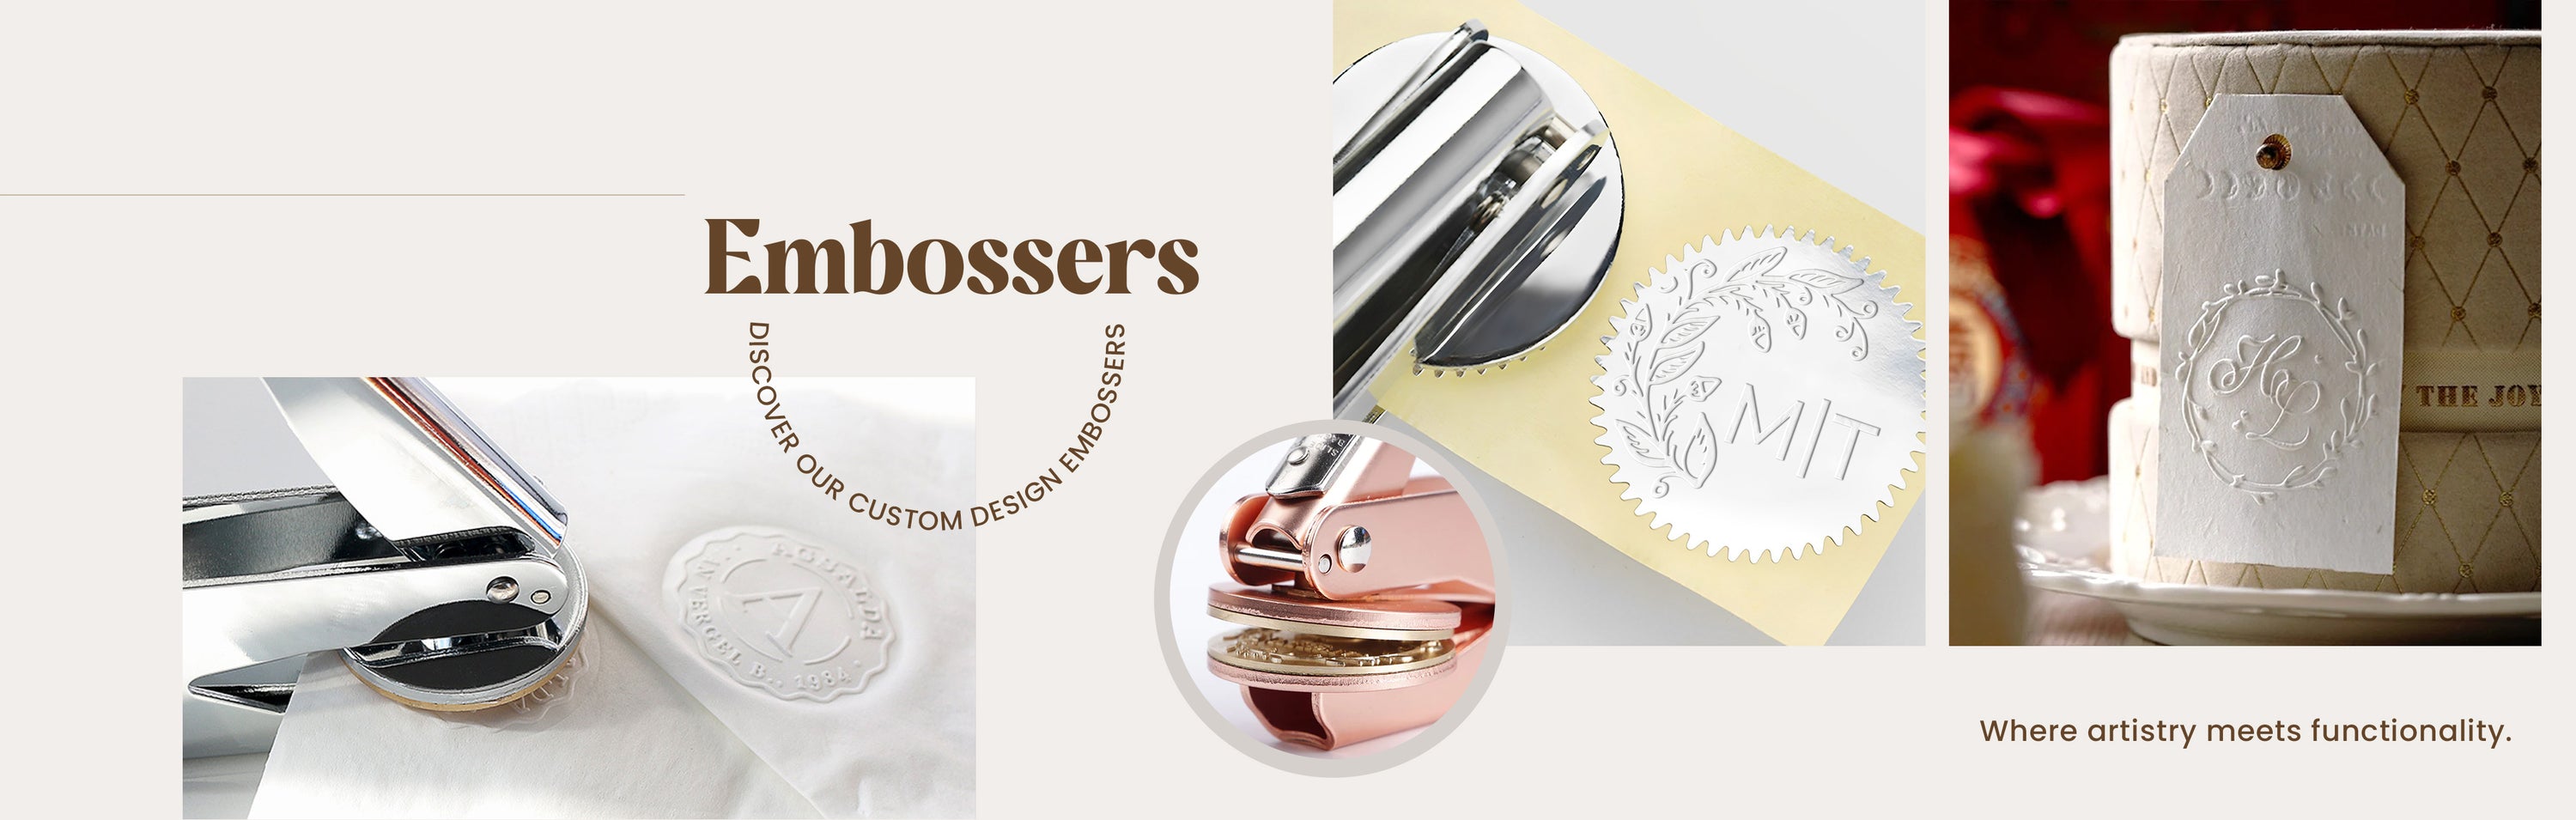 Custom Embossers - Imprint your unique style with our exclusive Custom Design Embossers. Elevate your documents and stationery to unparalleled heights with personalized artwork.